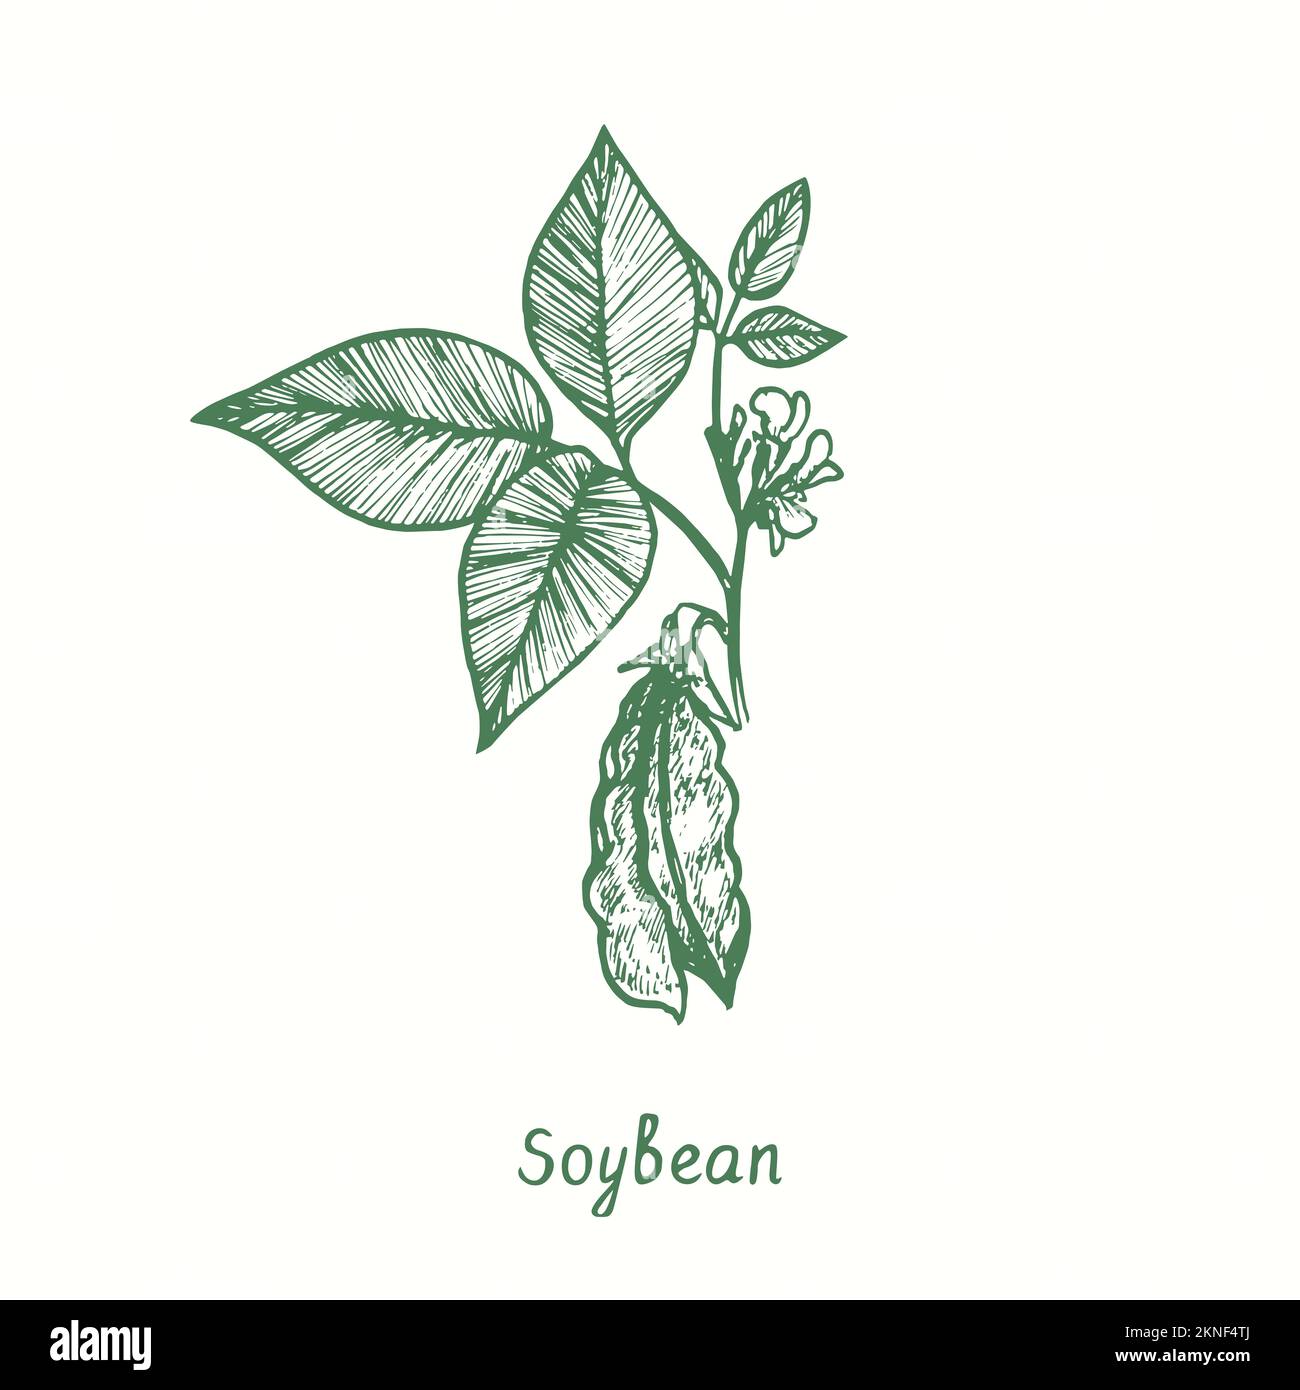 Drawing soybeans Royalty Free Vector Image - VectorStock